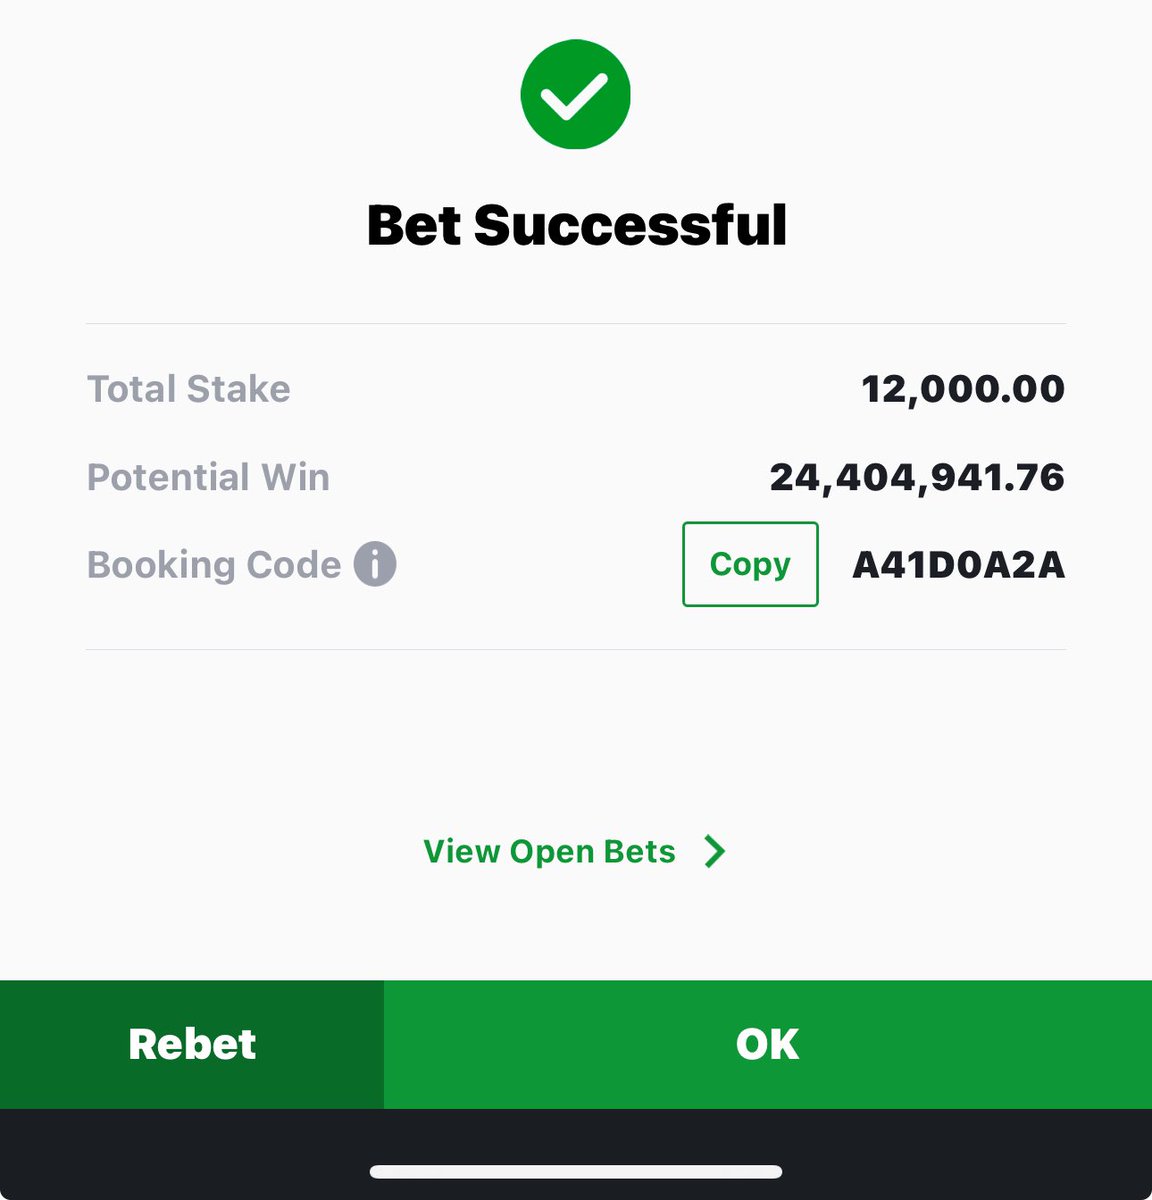 1232 odds basketball 🏀 

Sporty code A41D0A2A

First half over 🍀🙏

Boom luck everyone 🙏🙏🙏🙏